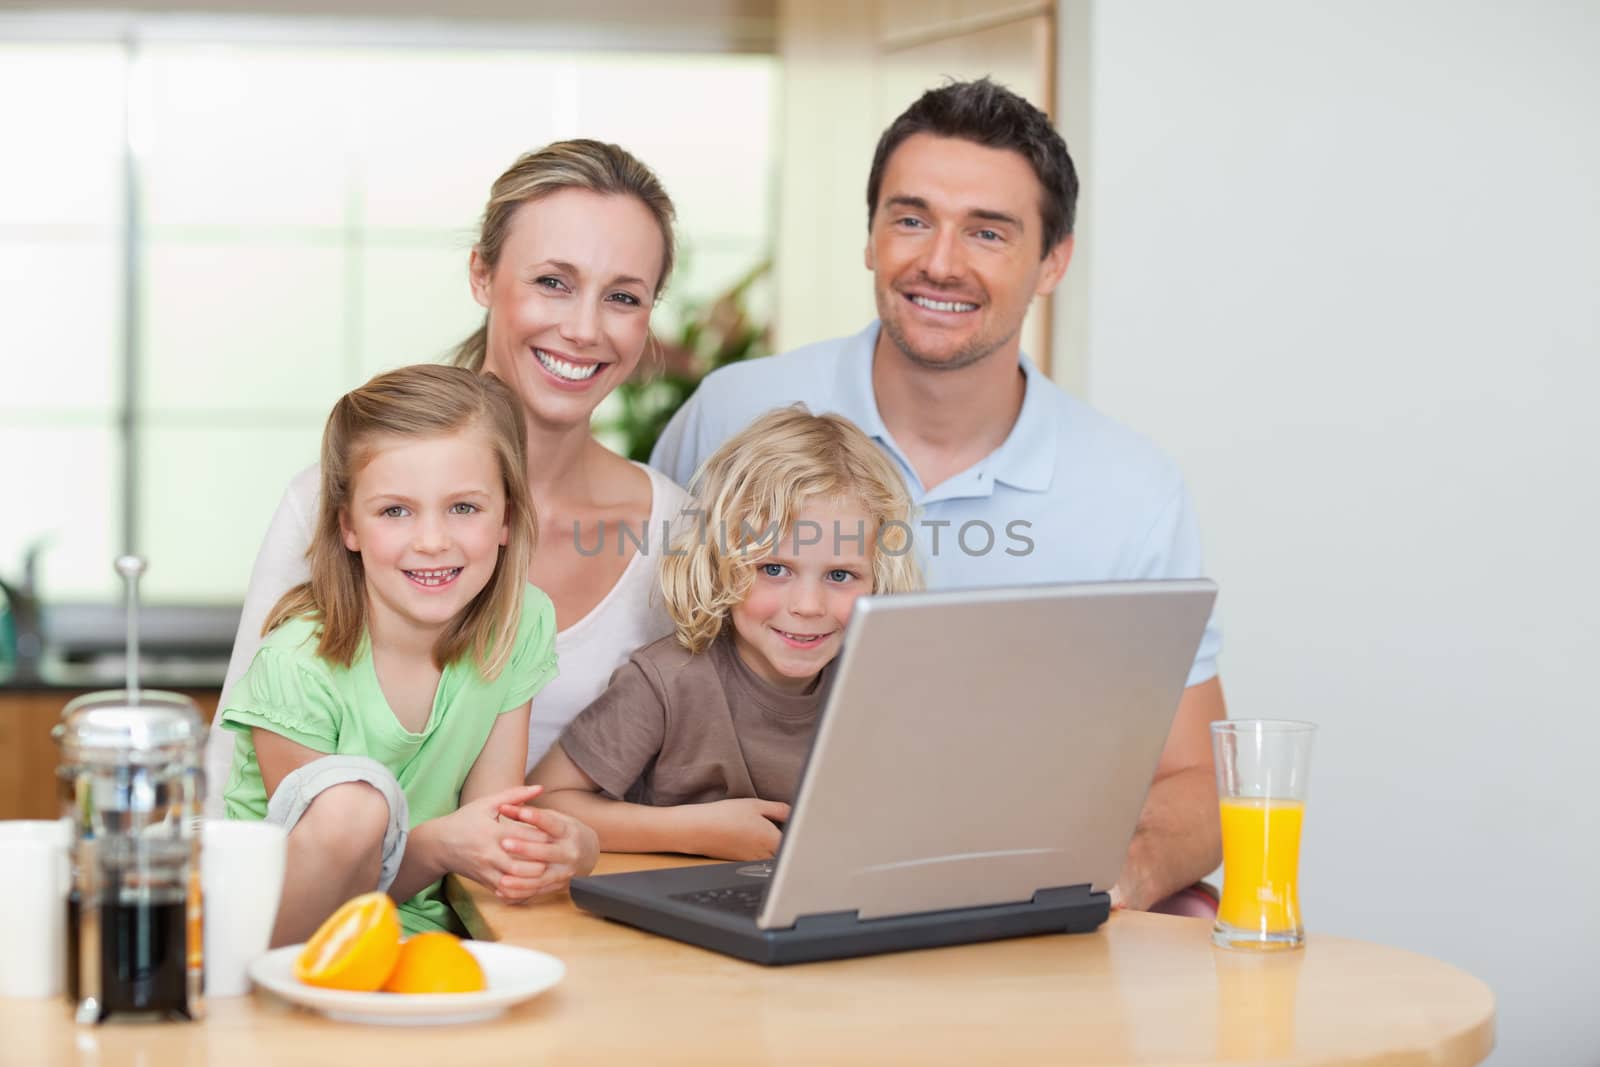 Smiling family using the internet in the kitchen by Wavebreakmedia